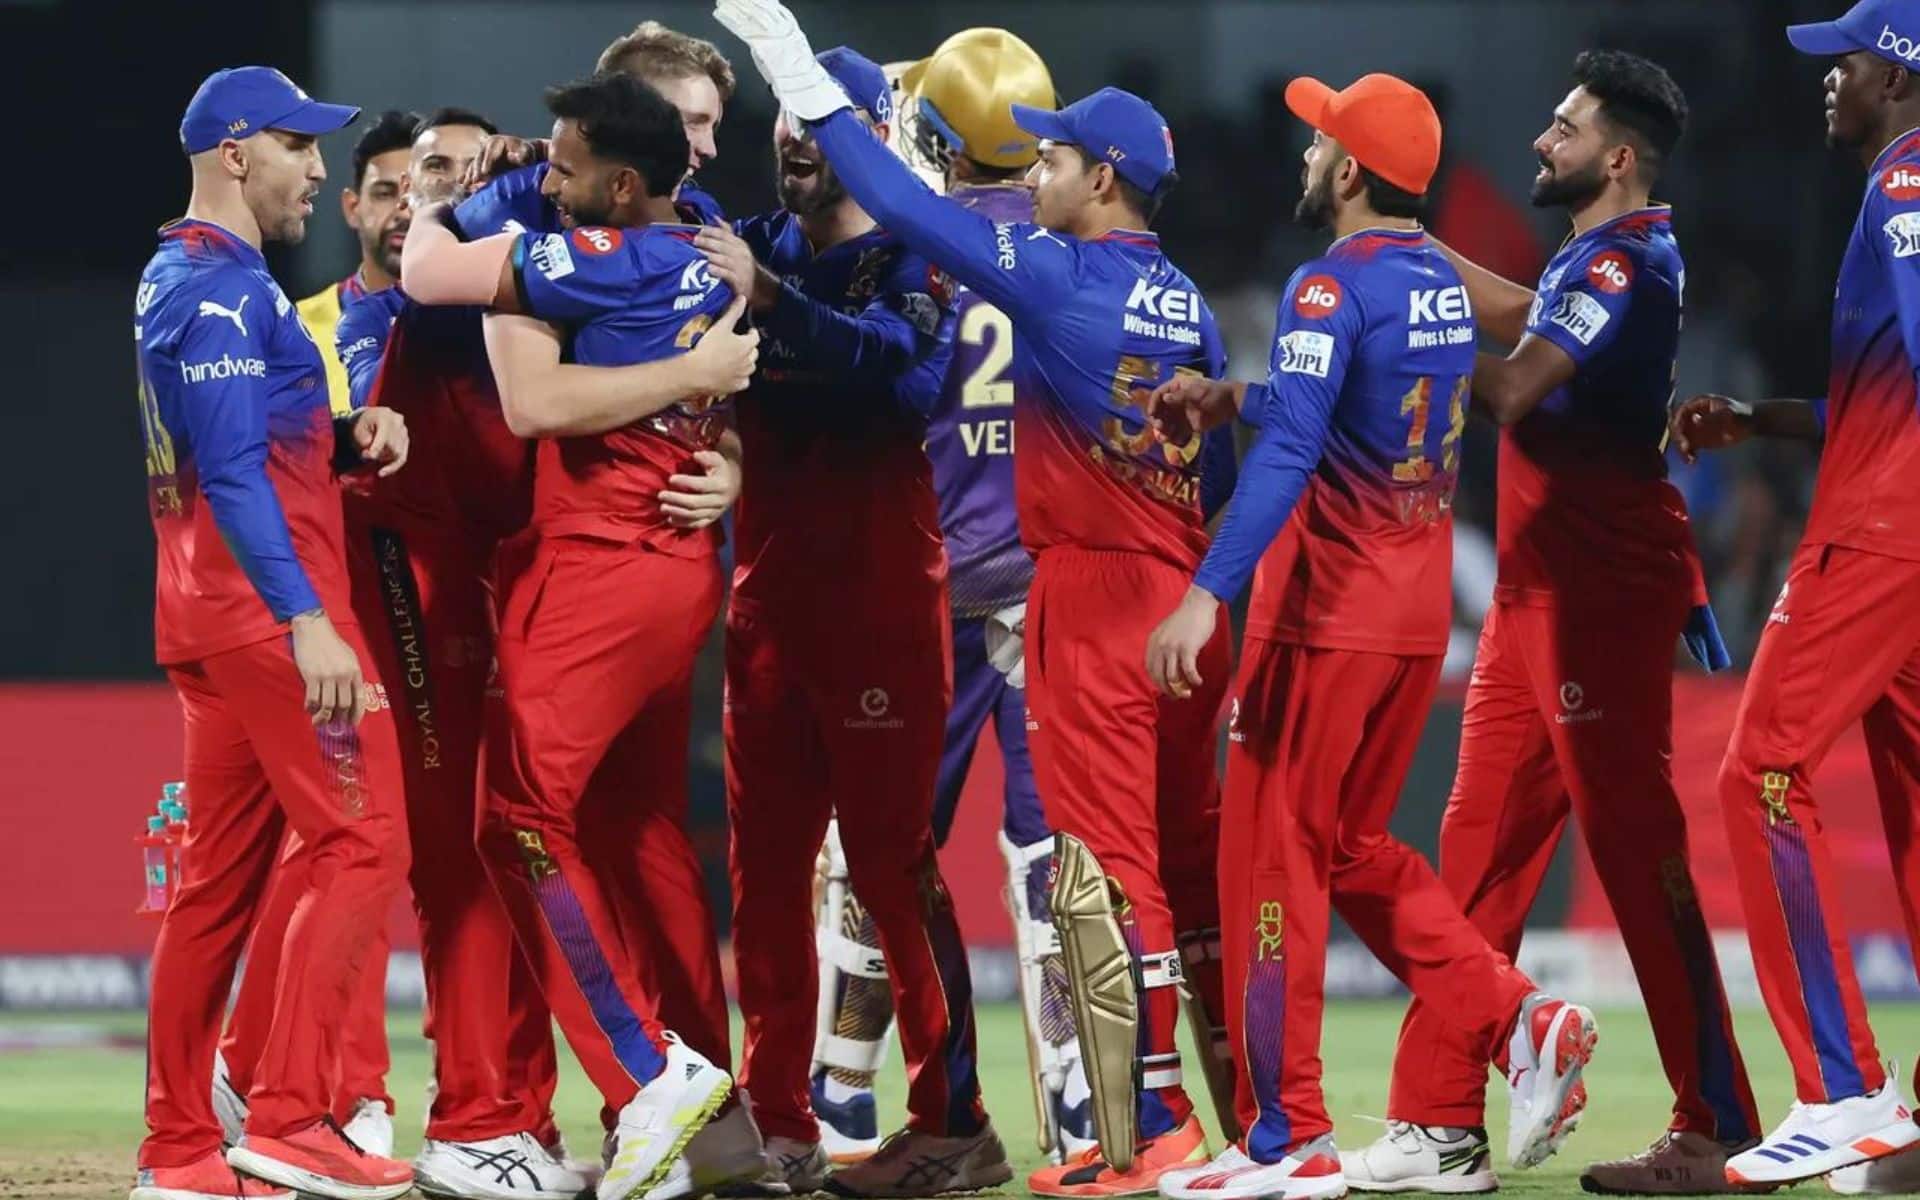 RCB had a disappointing start to their IPL campaign (iplt20)